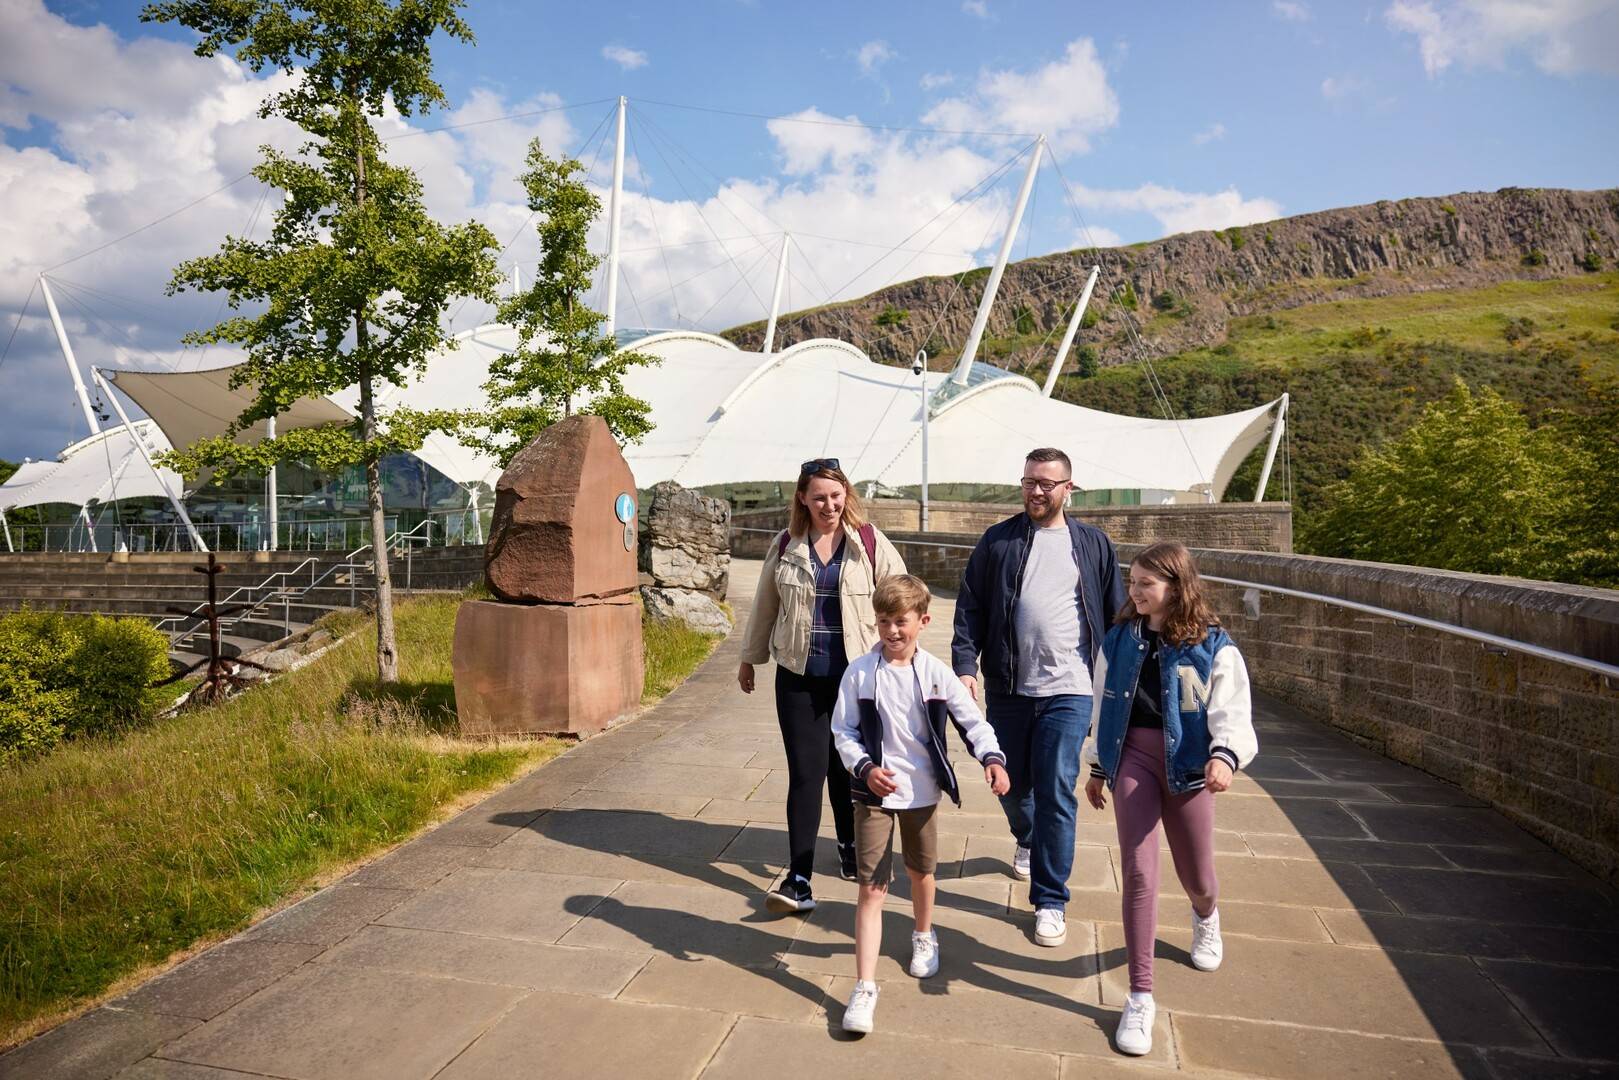 Happy Family group leaving Dynamic Earth with Arthur's Seat in the background.
